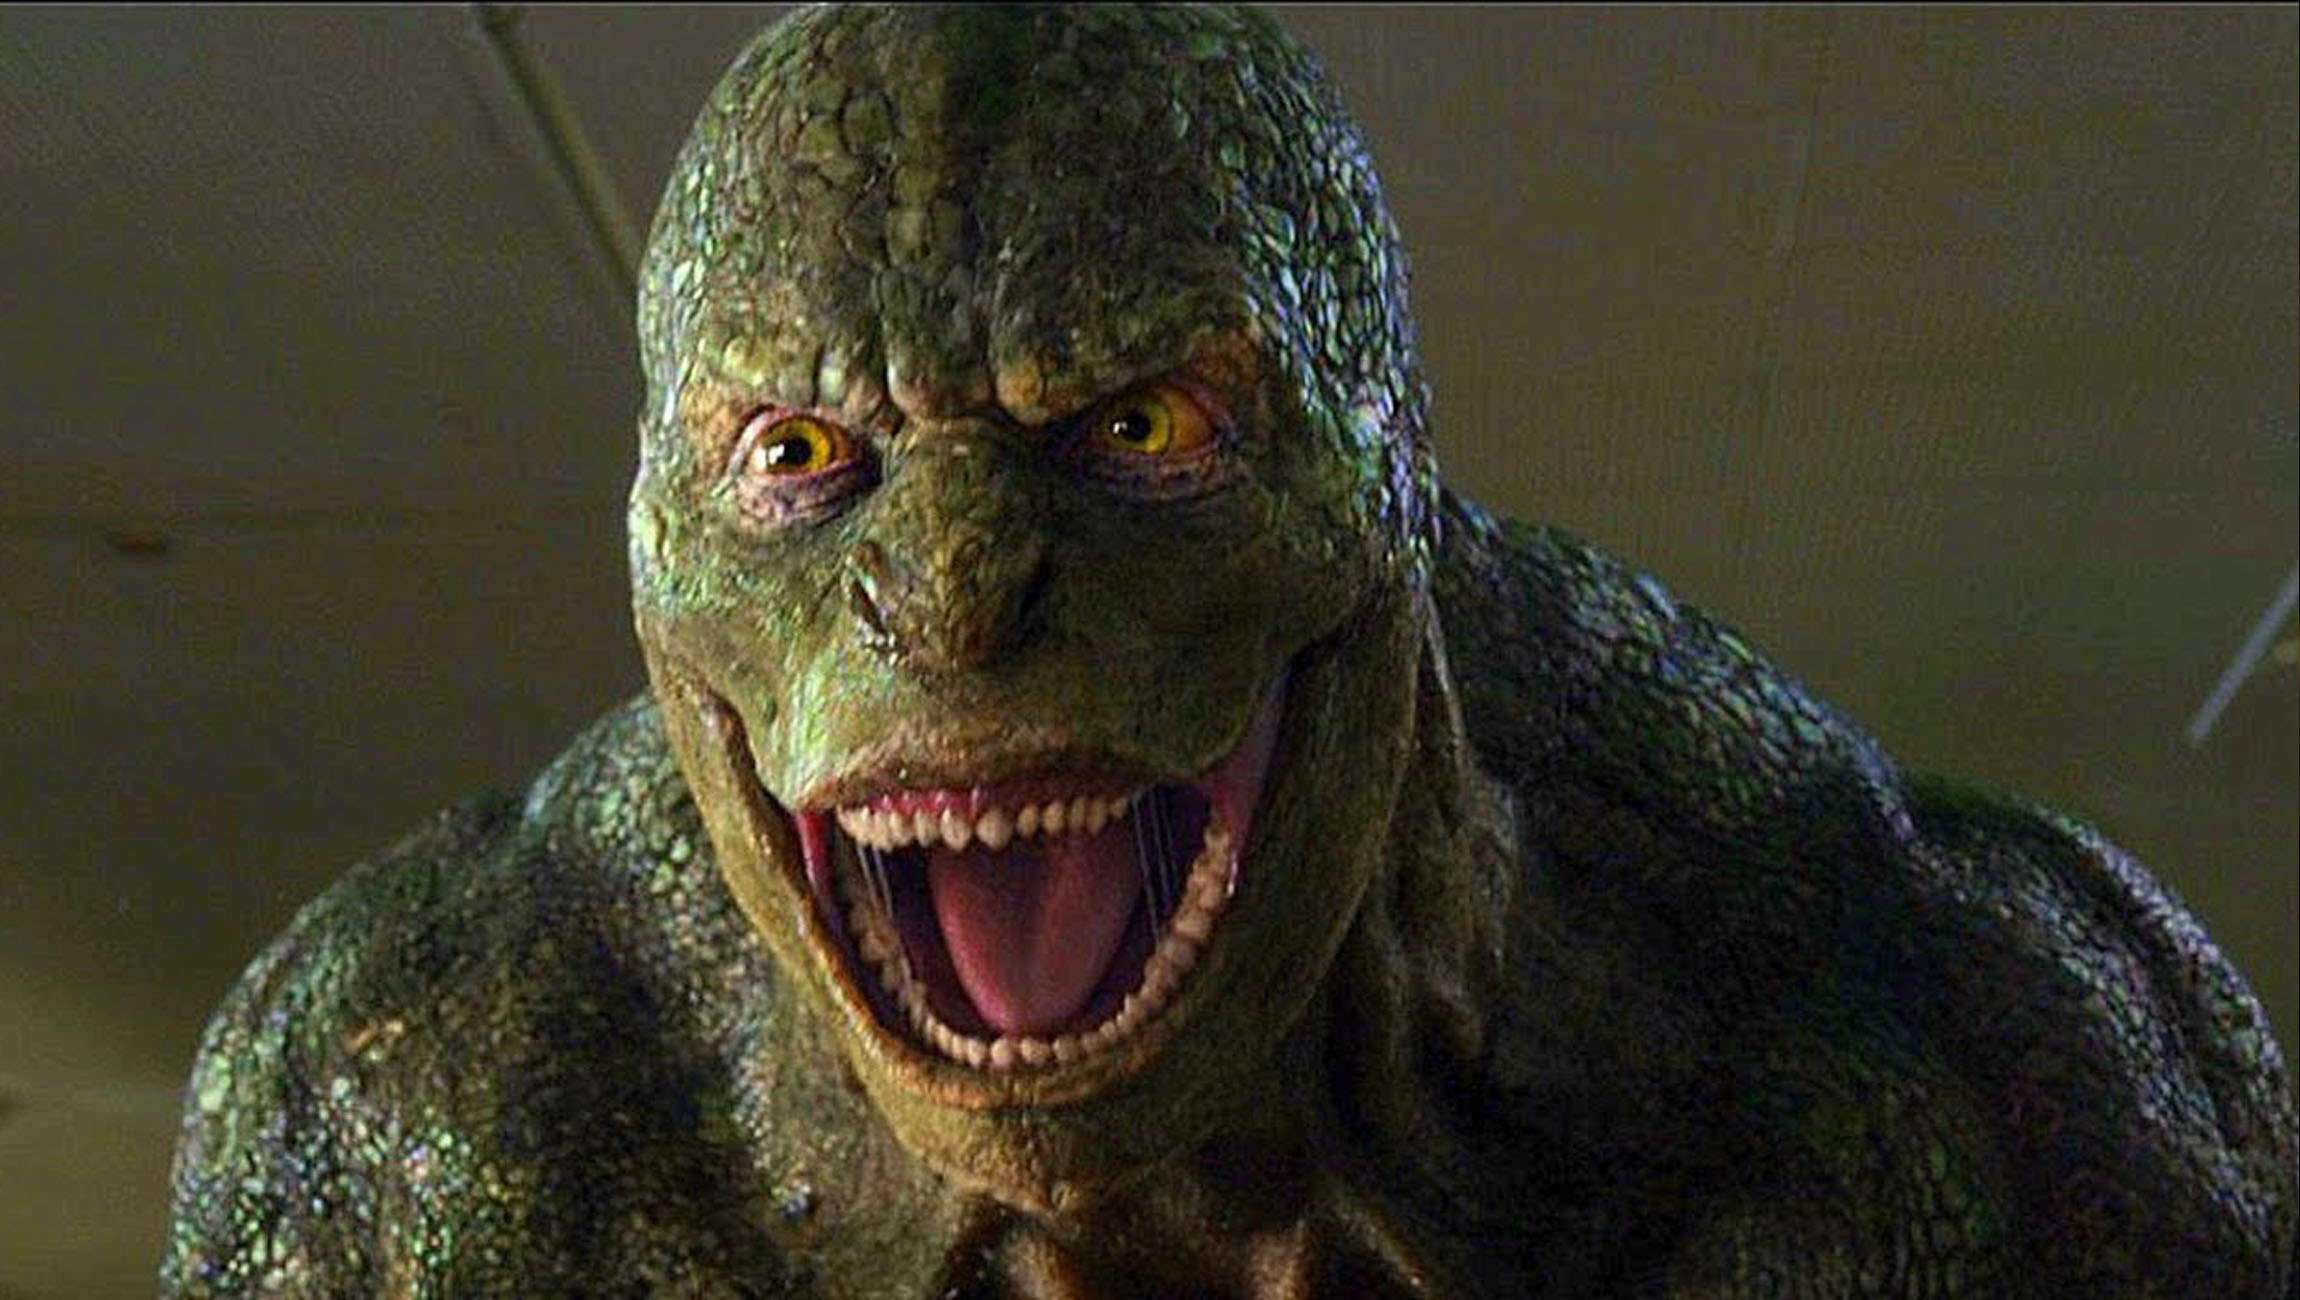 The Lizard from The Amazing Spider-Man.